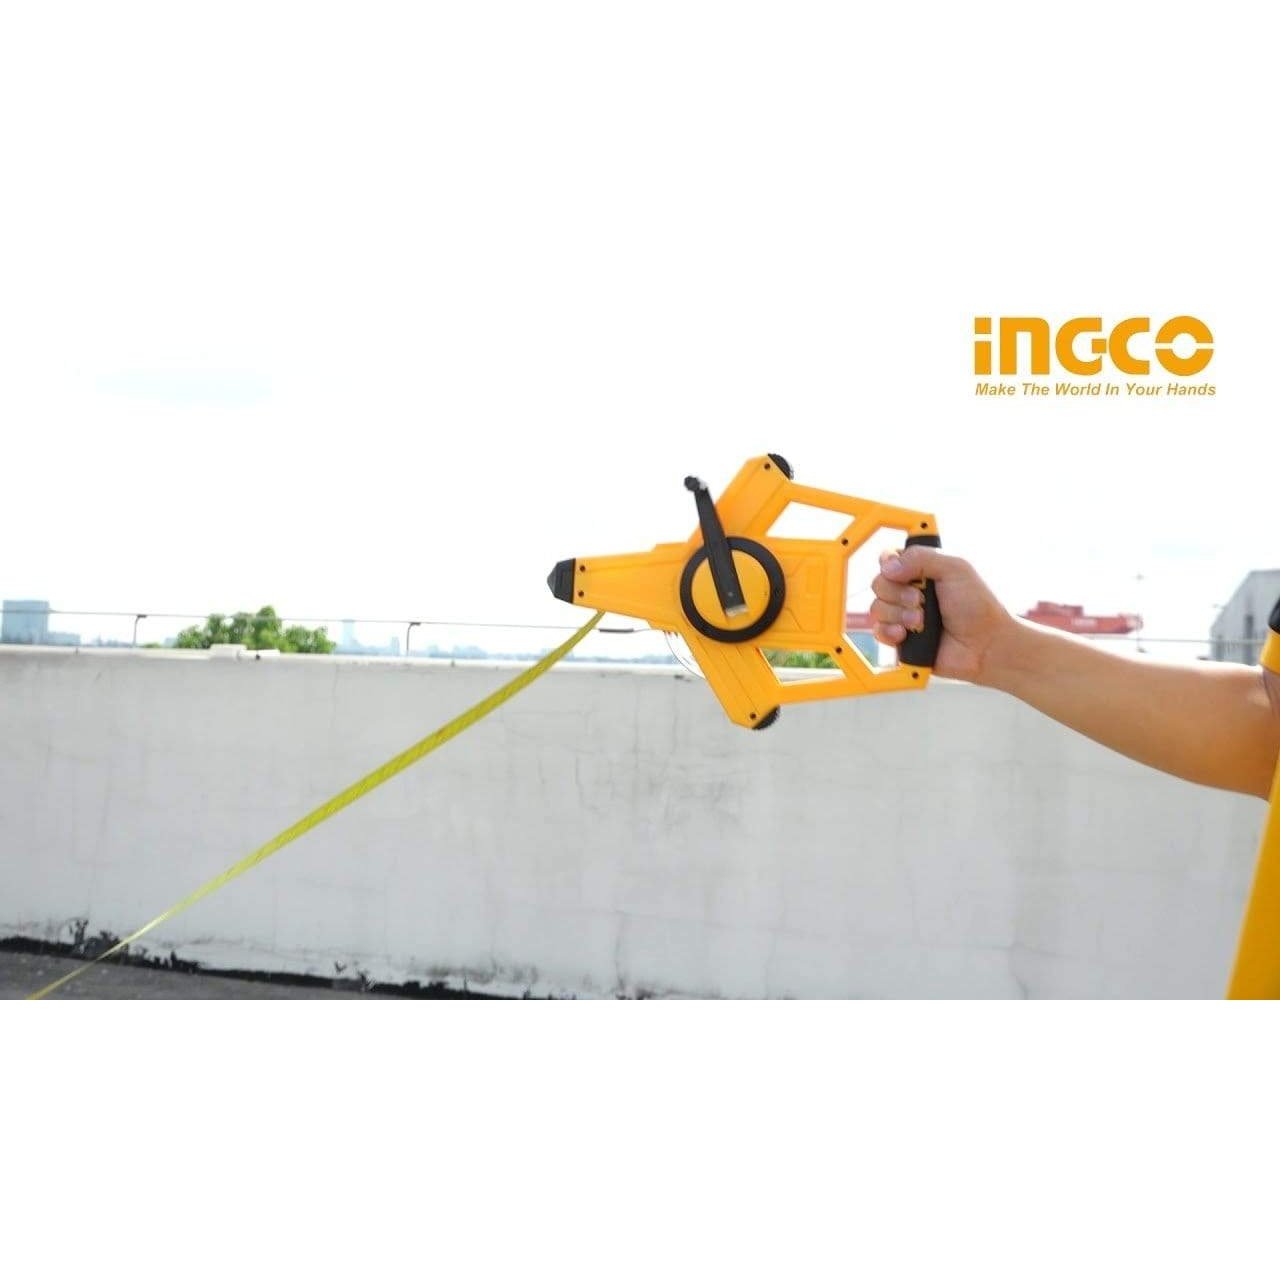 Ingco Fibreglass Measuring Tape, 50m x 12.5mm - HFMT8350 - Buy Online in Accra, Ghana at Supply Master Tape Measure Buy Tools hardware Building materials